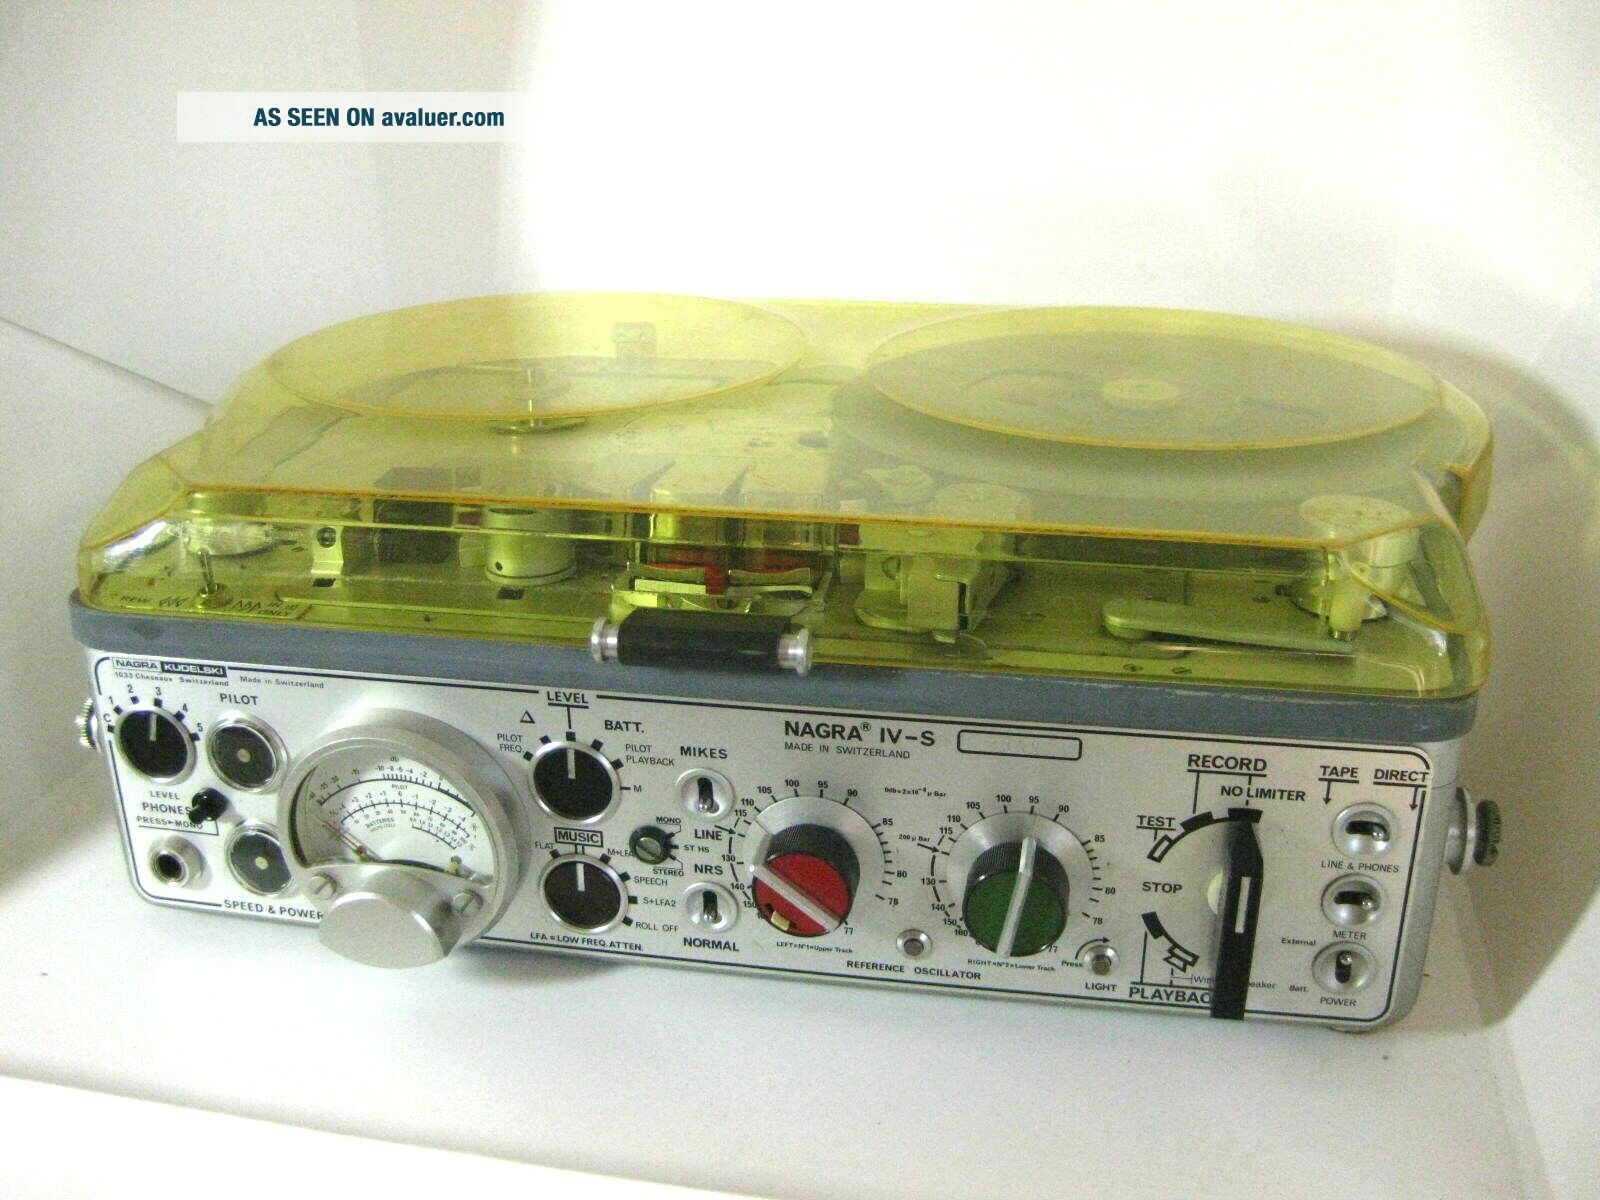 Nagra IV - S STEREO Reel to Reel Portable Deck Deck